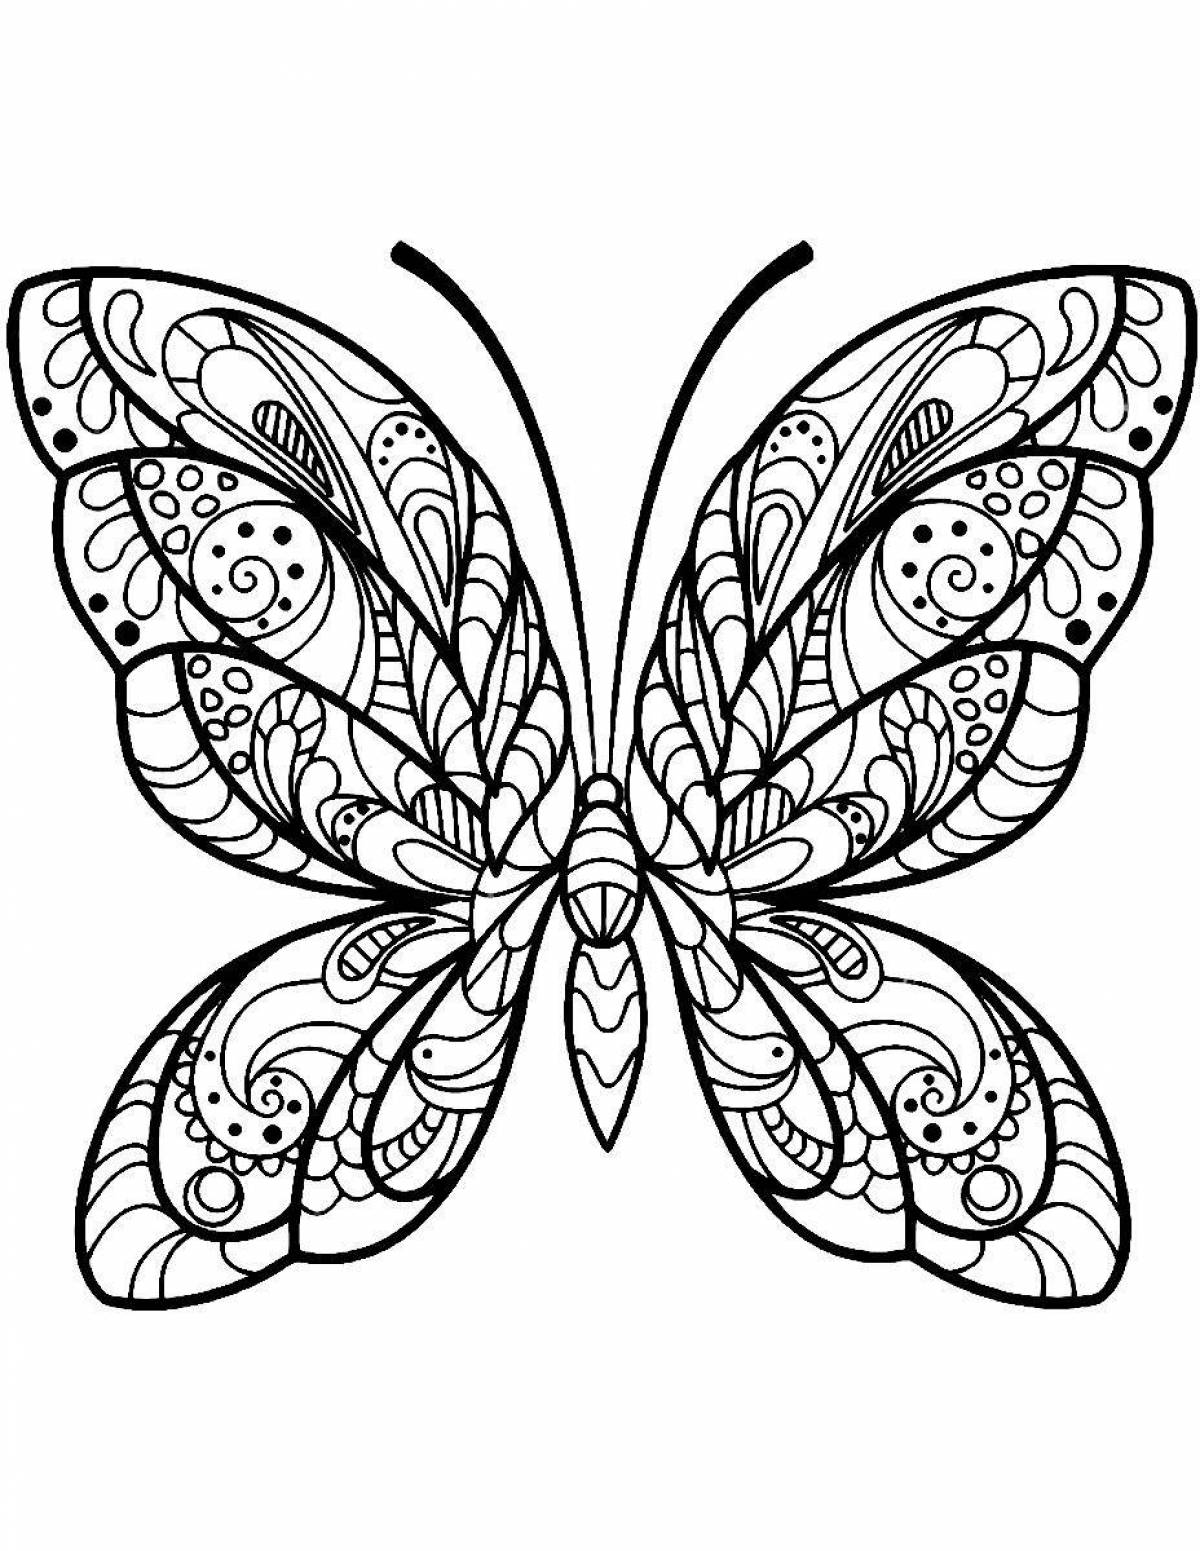 Live butterfly coloring book